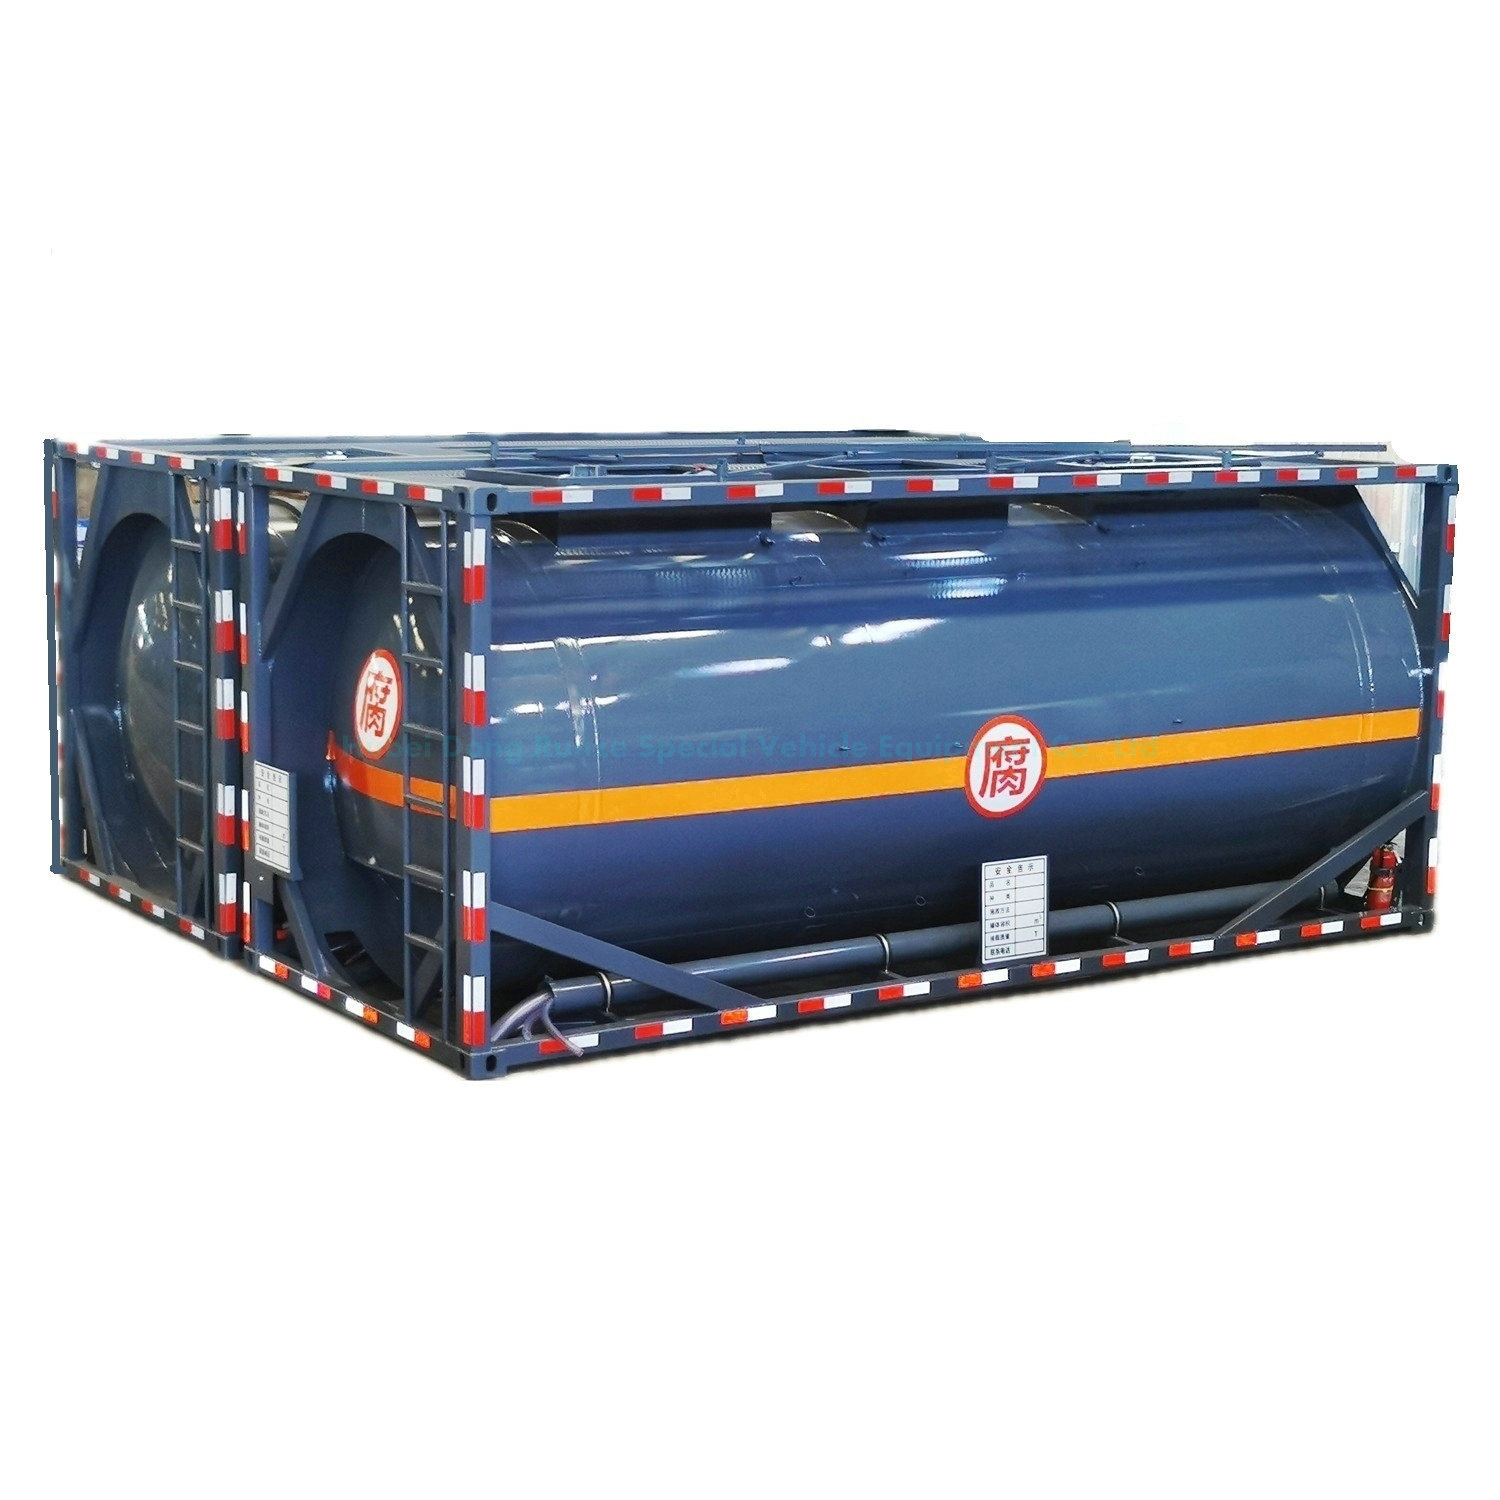 20FT SS30408 Stainless Steel Nitric Acid Hno3, Hf Acid, Naoh Sodium Hydroxide ISO Tank Container